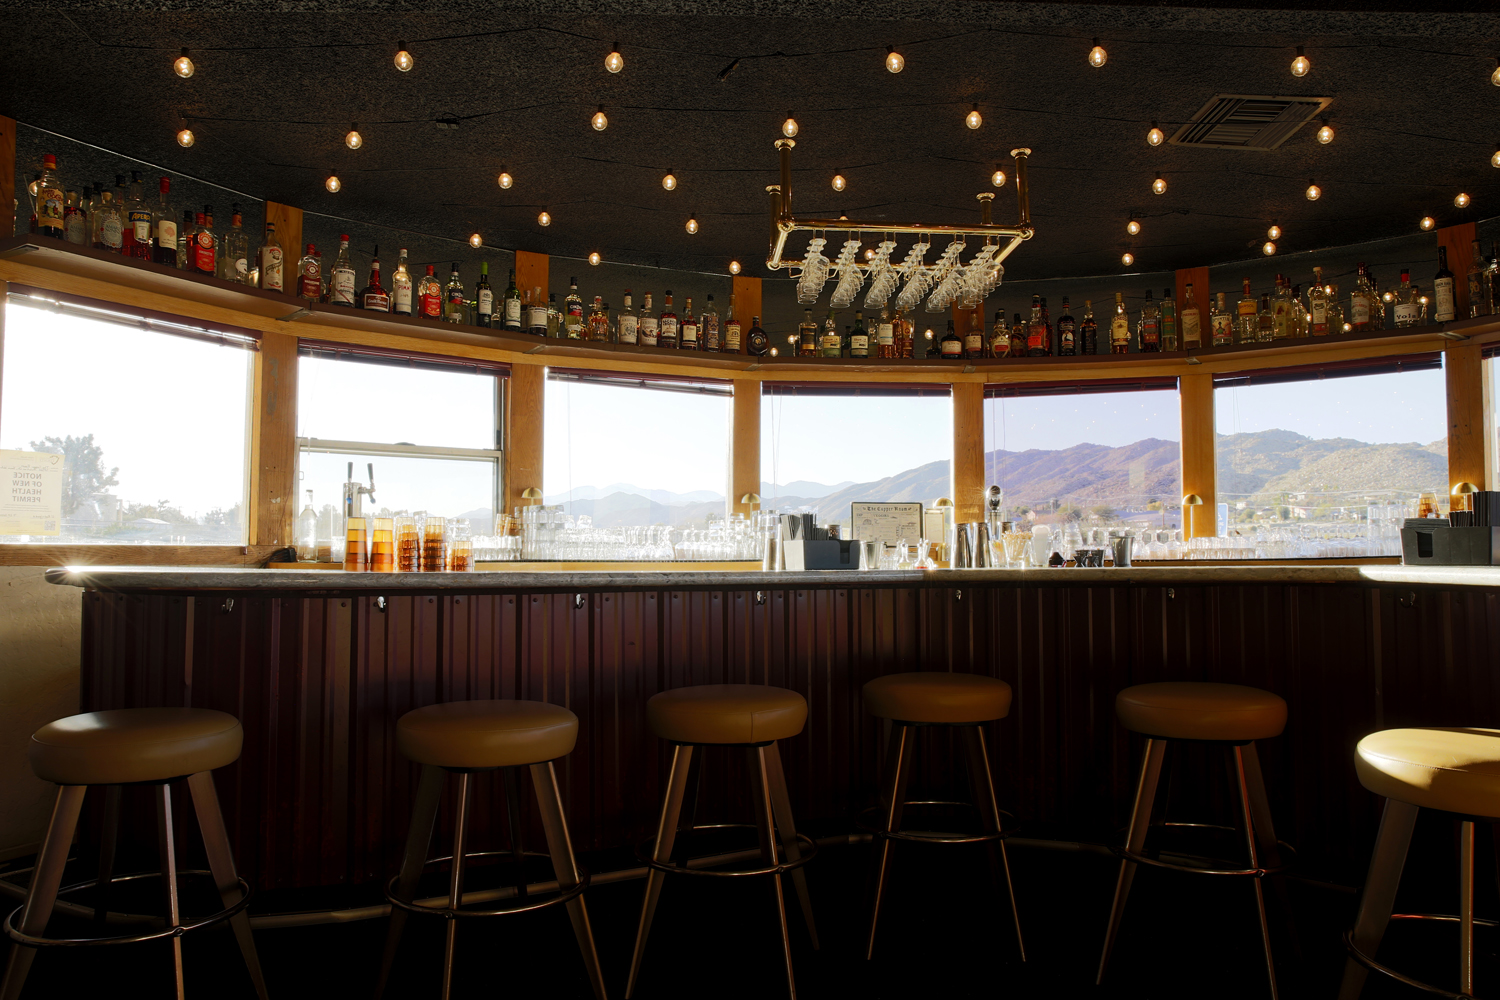 Interior view of the bar at The Copper Room restaurant and bar located at the airport in Yucca Valley, California.